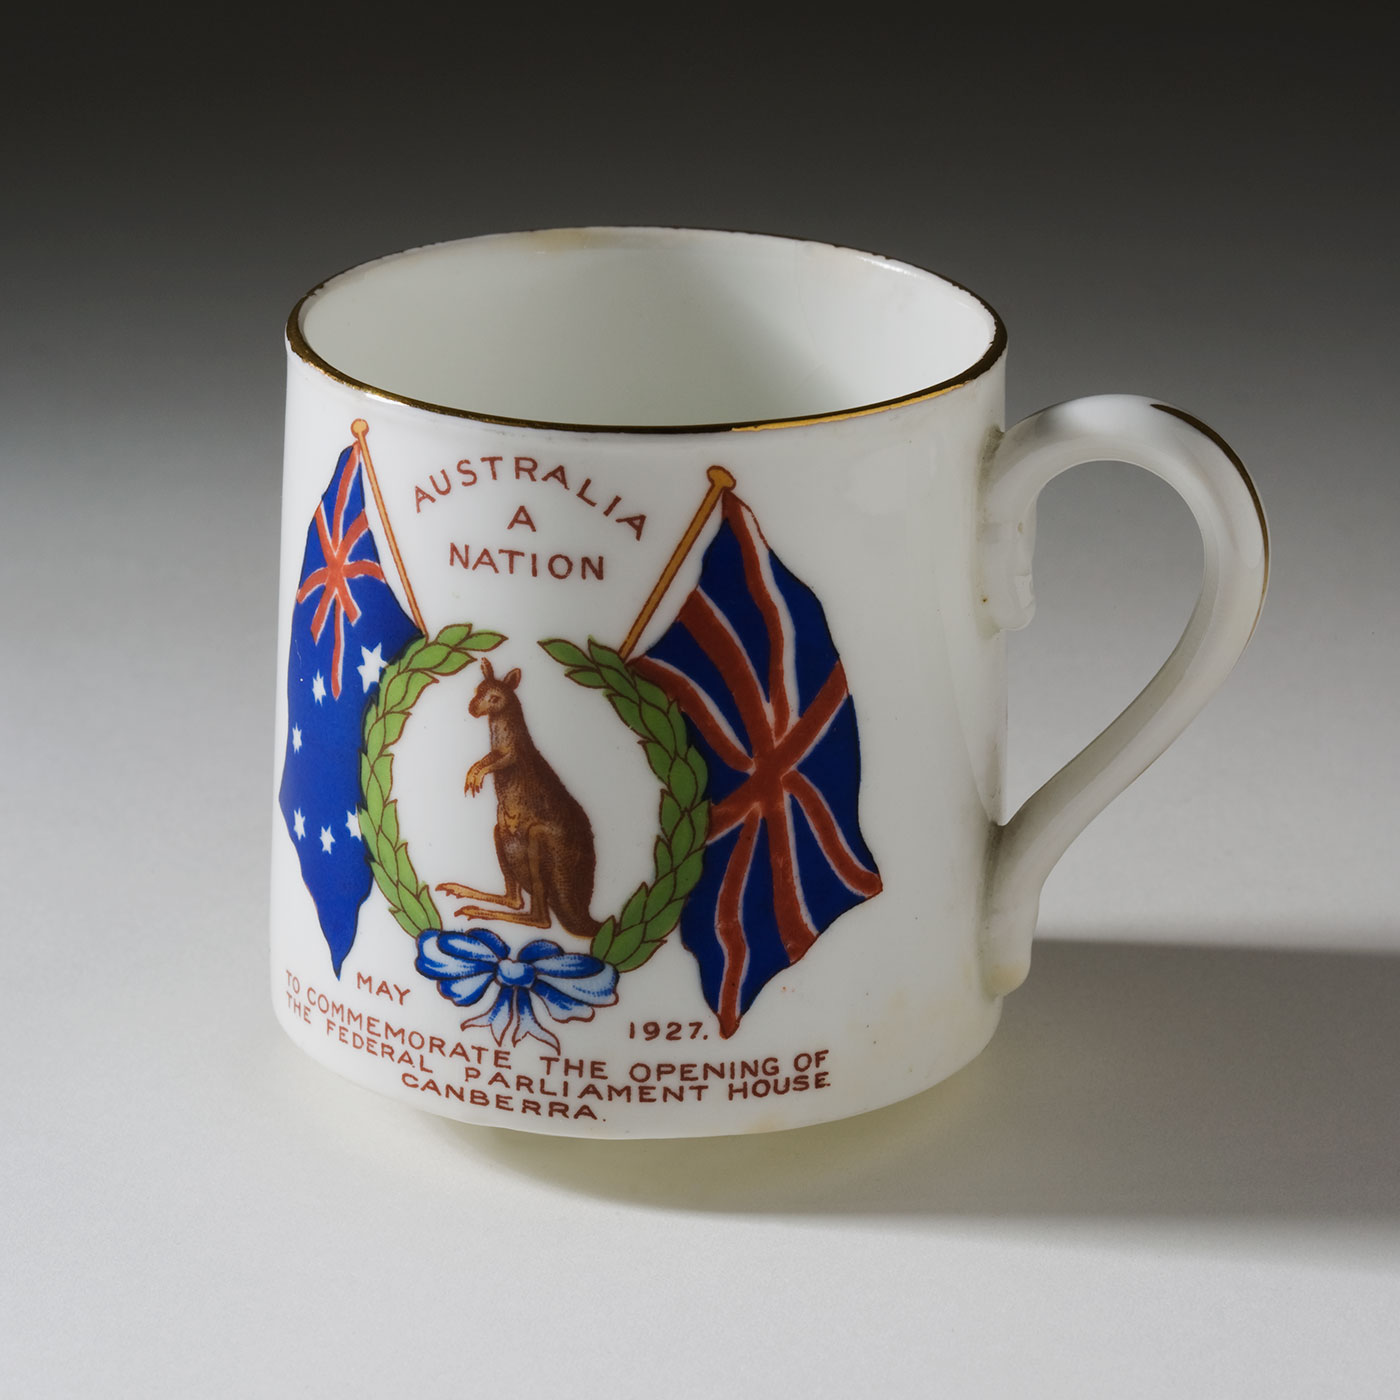 White mug with gold rim showing a kangaroo in a garland of leaves. 'Australia A Nation' is printed at the top, between the Union Jack and Australian flags which hang at either side of the illustration. 'May 1927, To commemorate the opening of the federal parliament house, Canberra' is printed at the bottom of the cup. - click to view larger image